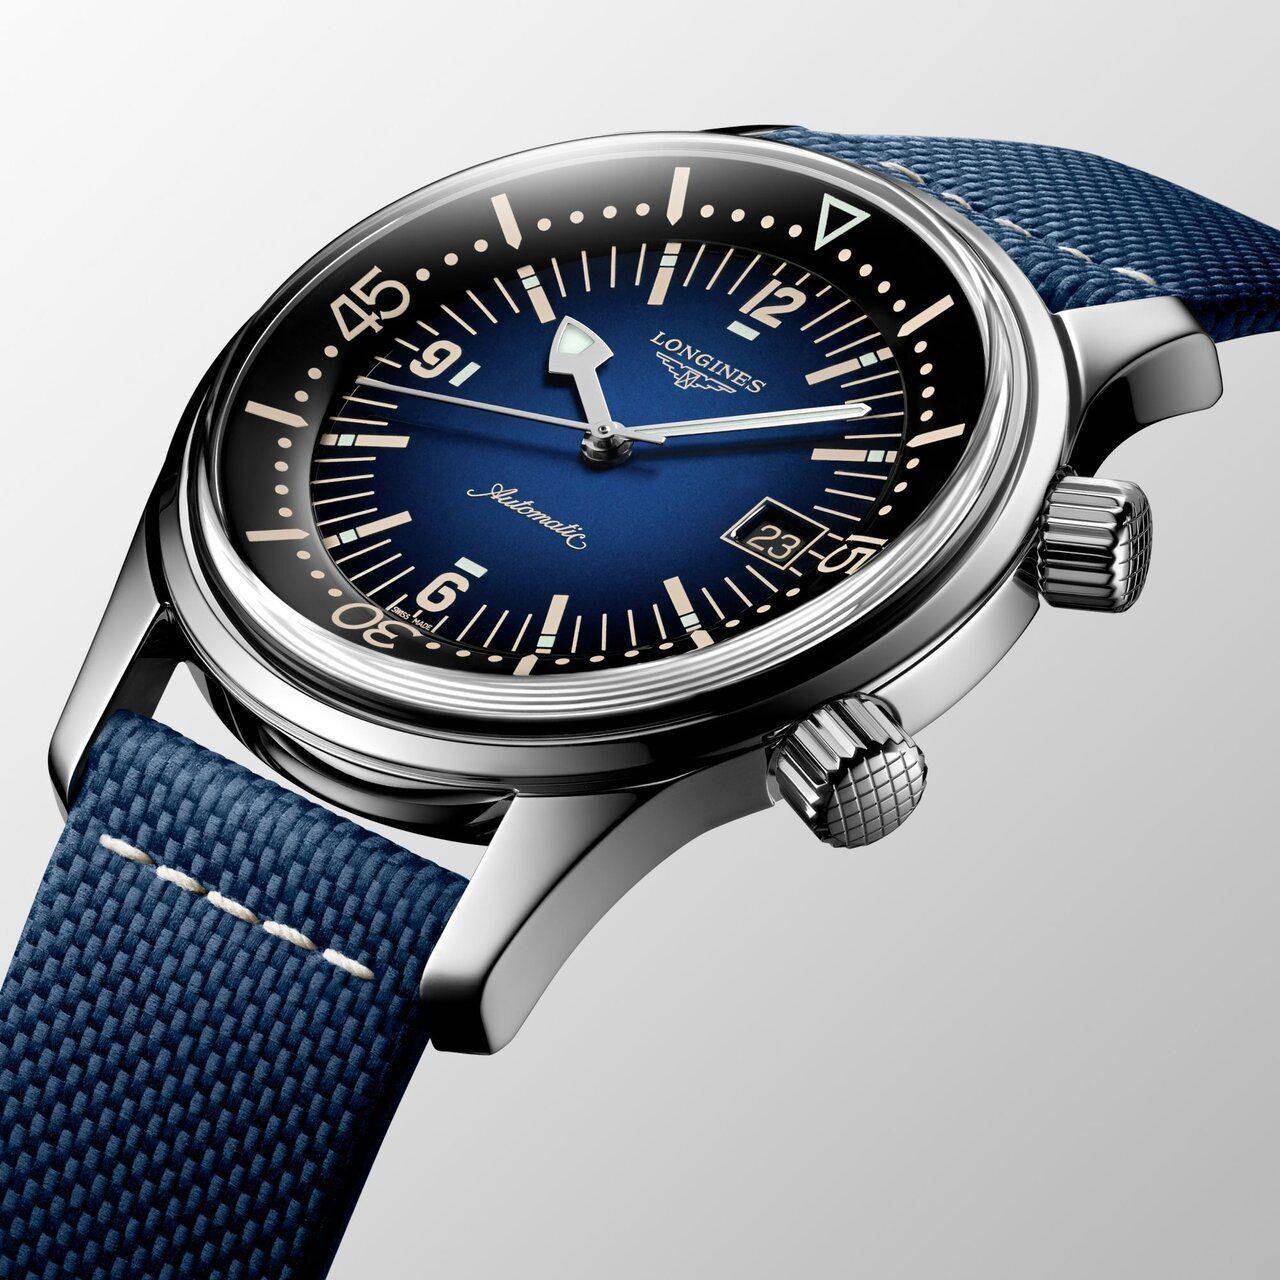 the-longines-legend-diver-watch-l3-774-4-90-2-detailed-view-2000x2000-1.jpg